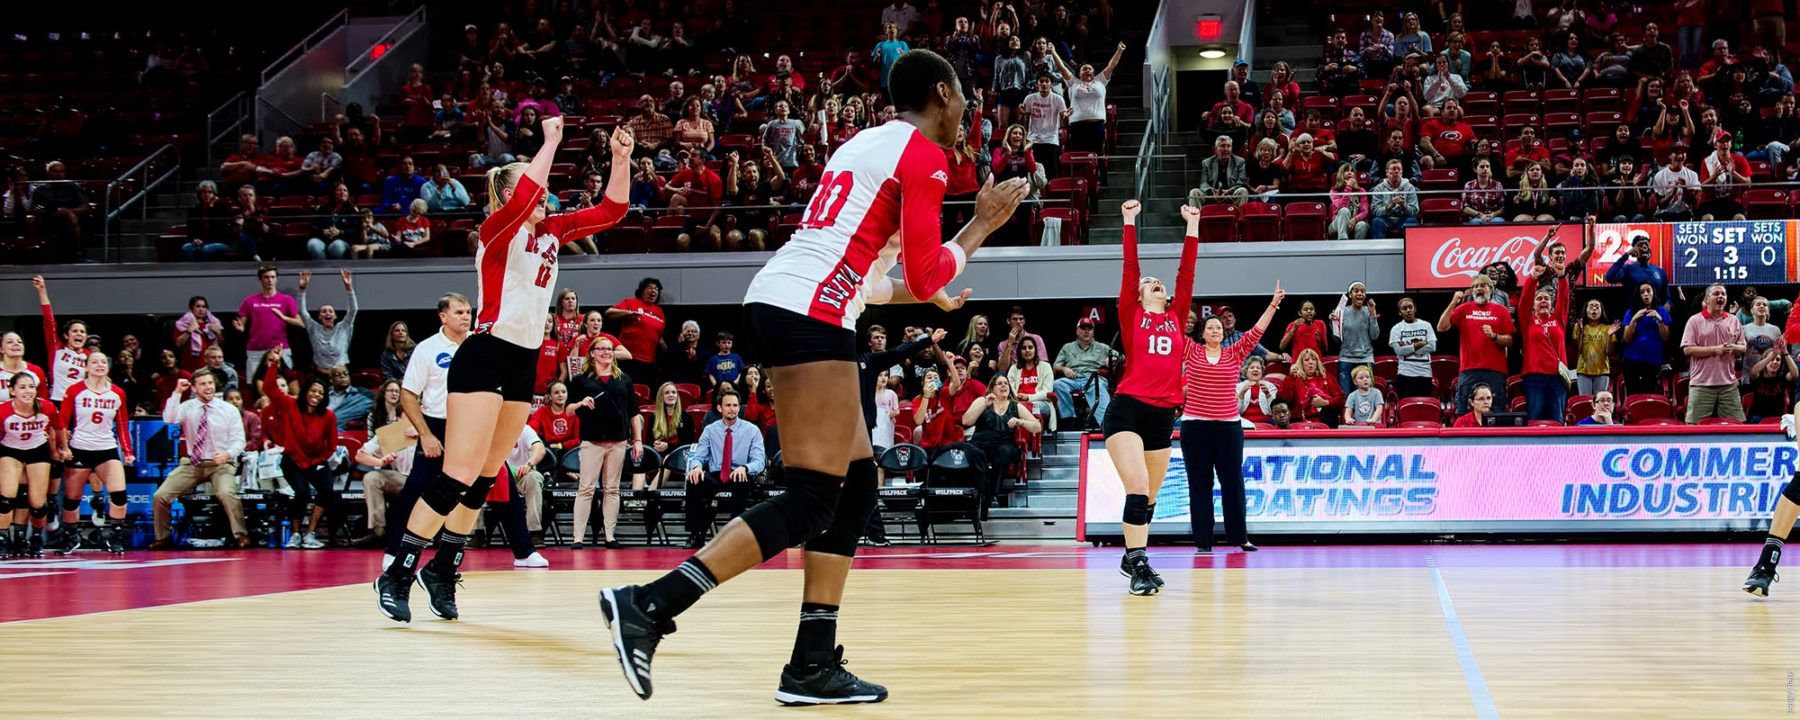 NC State To Host Clemson In ACC Match Up Thursday